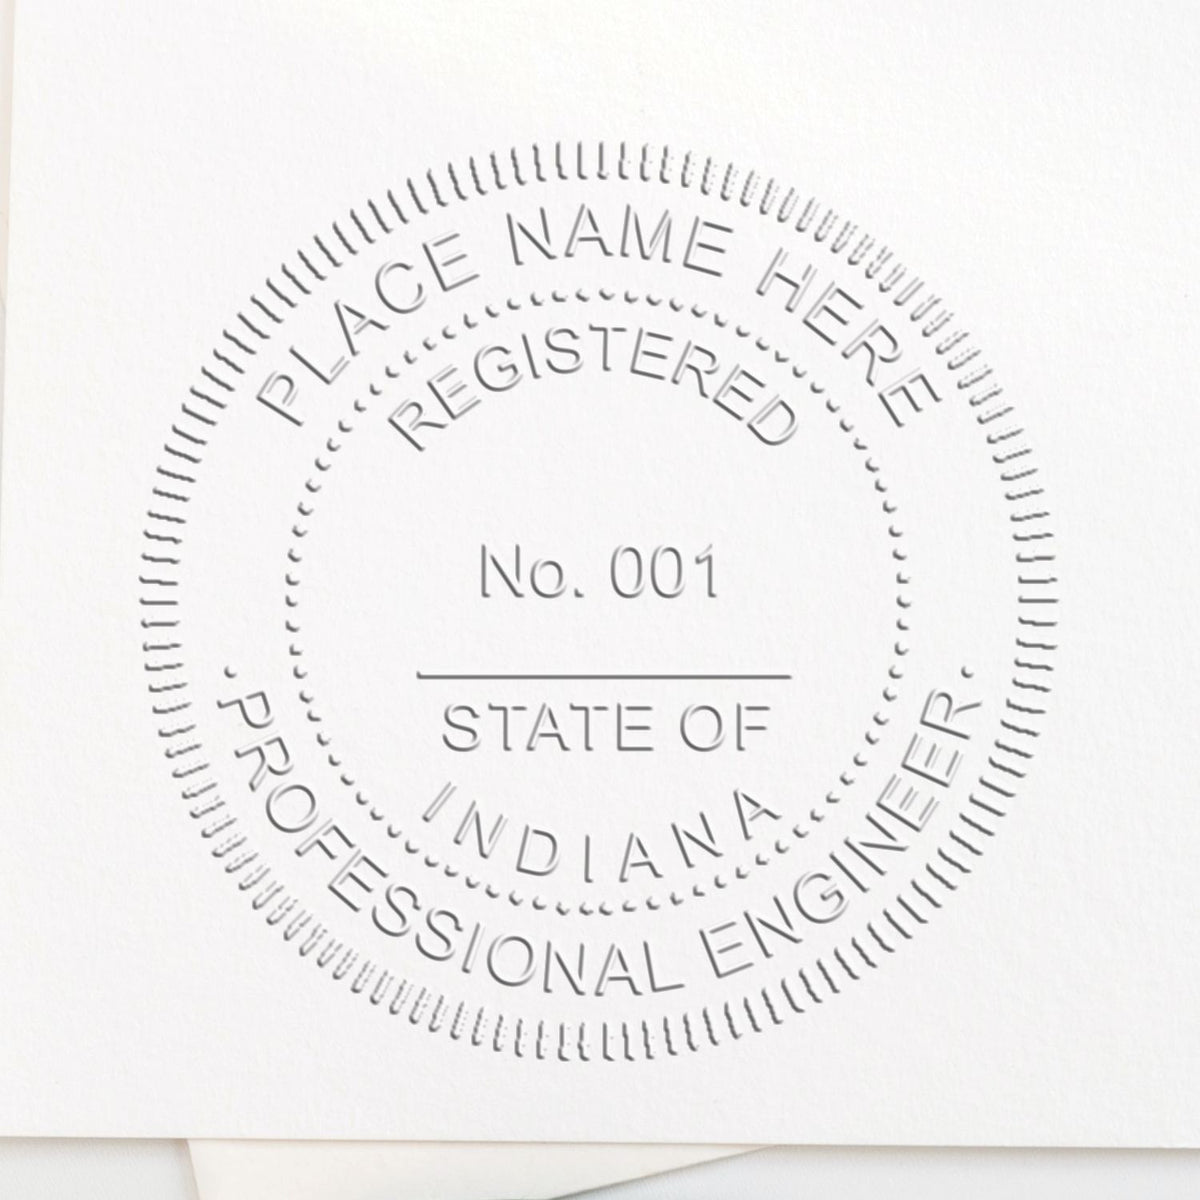 A photograph of the Soft Indiana Professional Engineer Seal stamp impression reveals a vivid, professional image of the on paper.